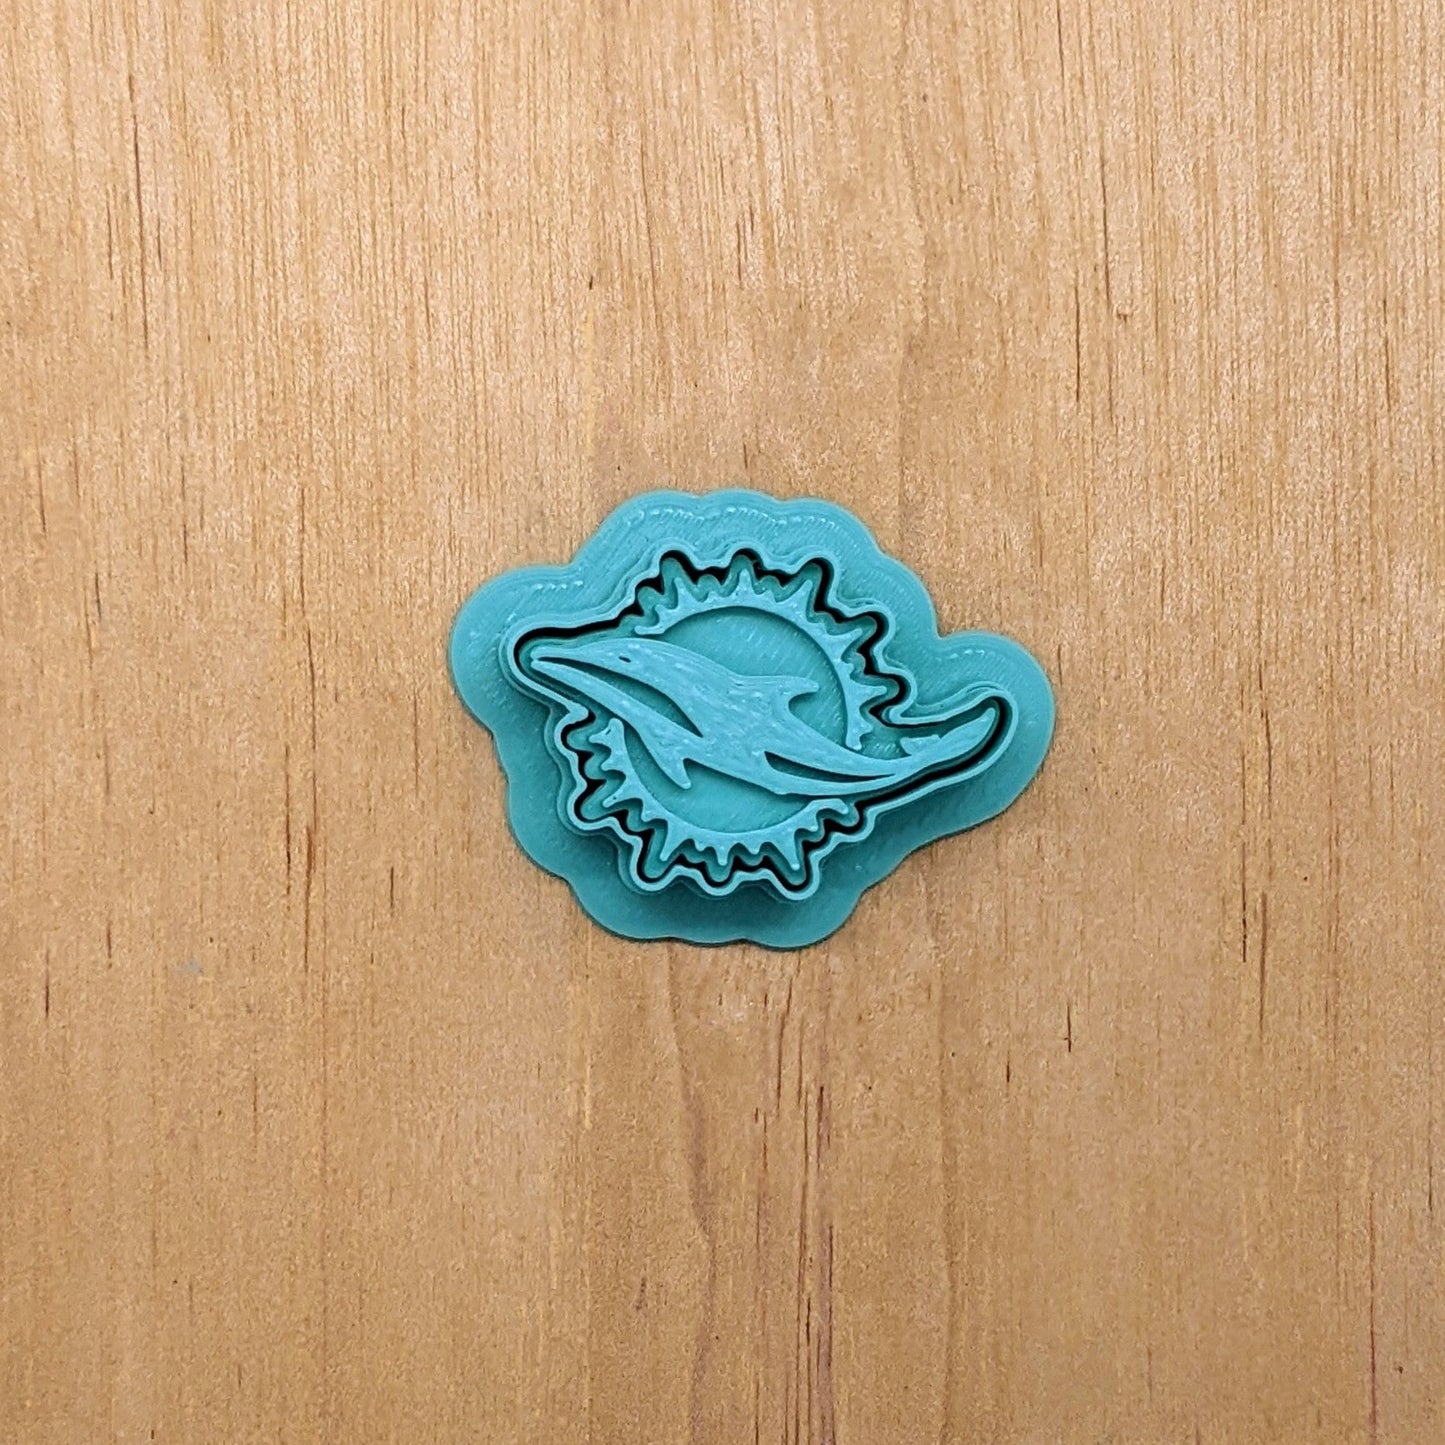 Miami Dolphins Cookie Cutter & Stamp Set